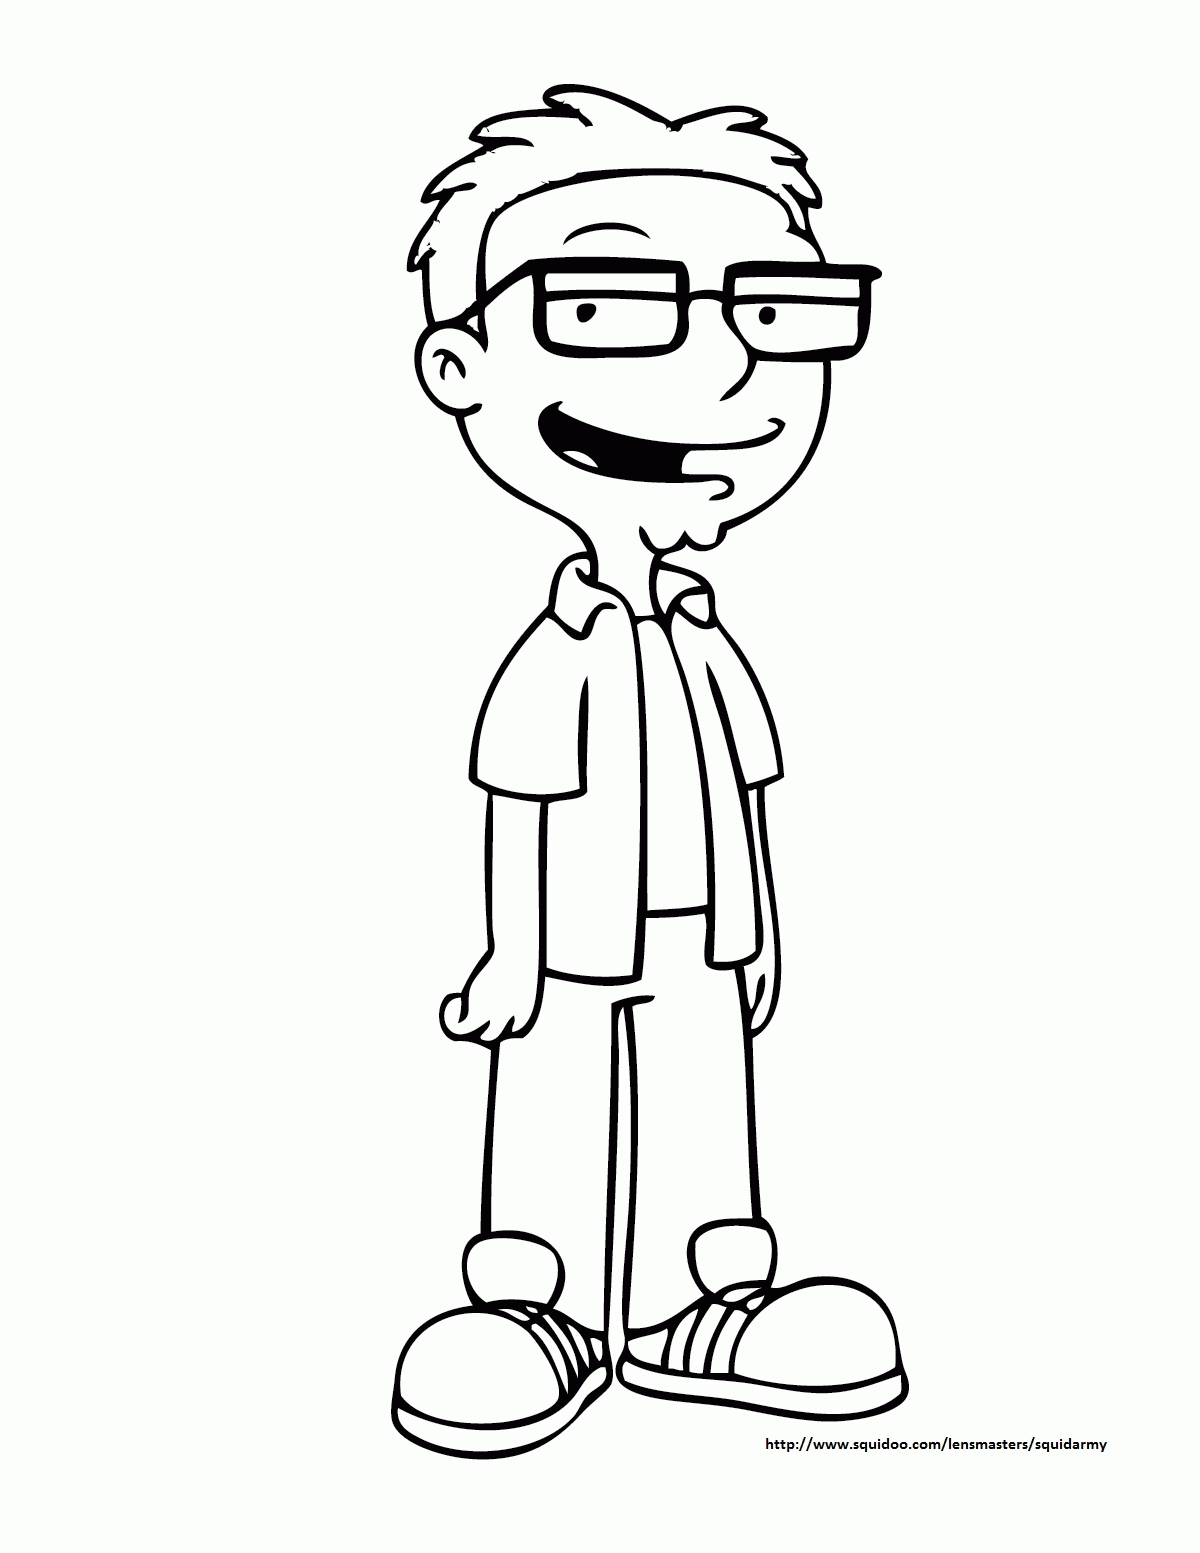 American Dad Coloring Pages Printable - Fun Pages for Fans of the Show